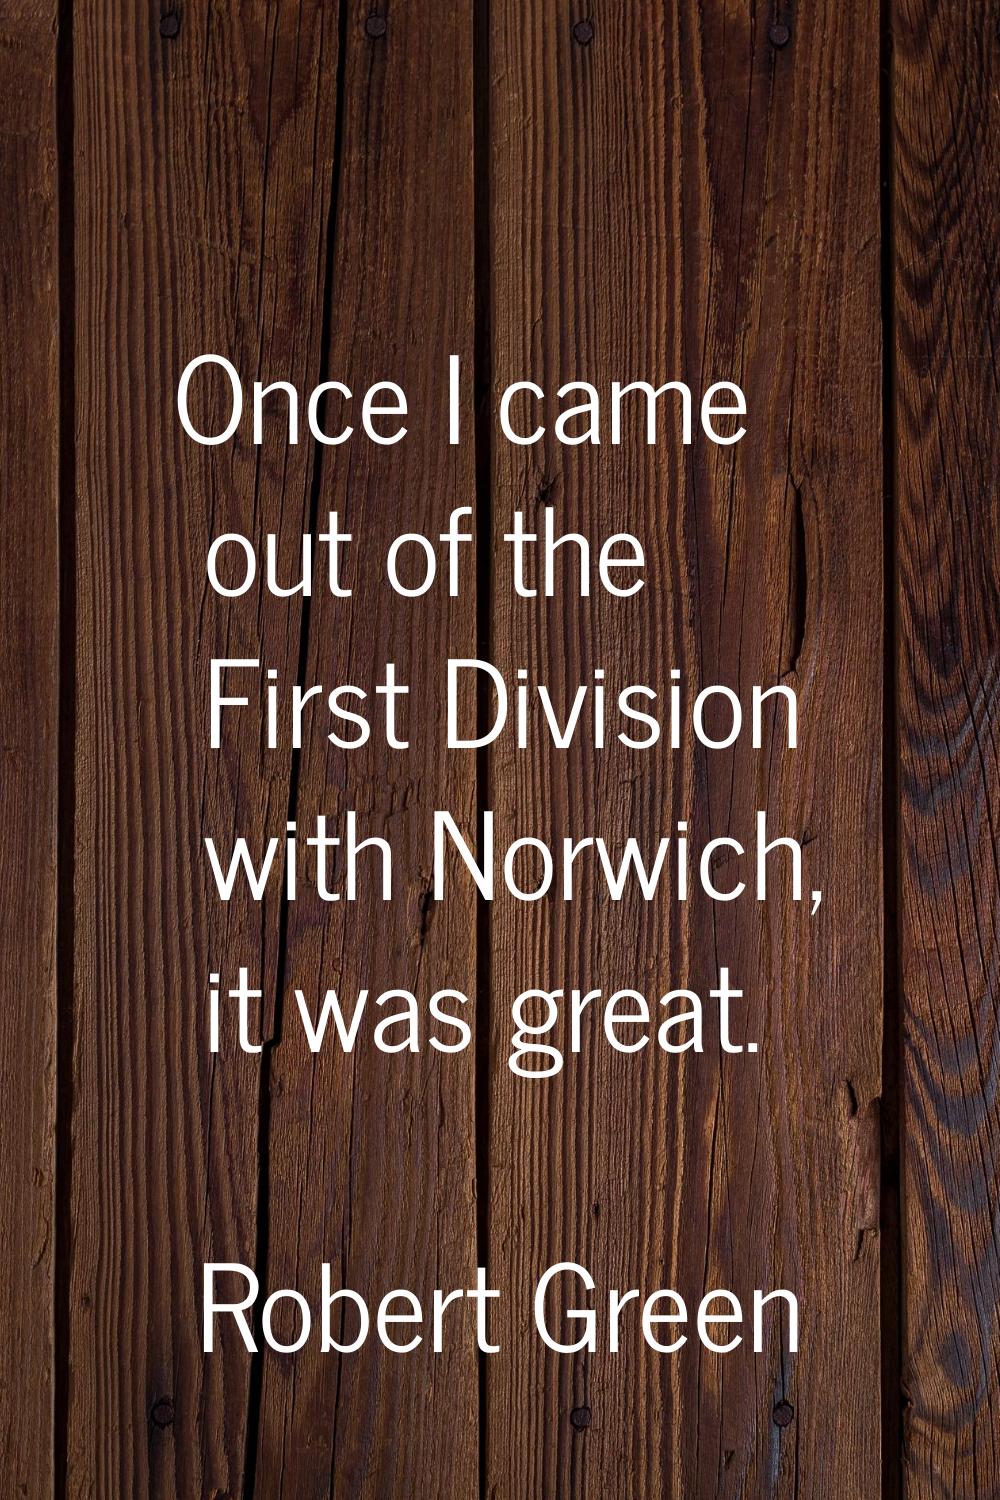 Once I came out of the First Division with Norwich, it was great.